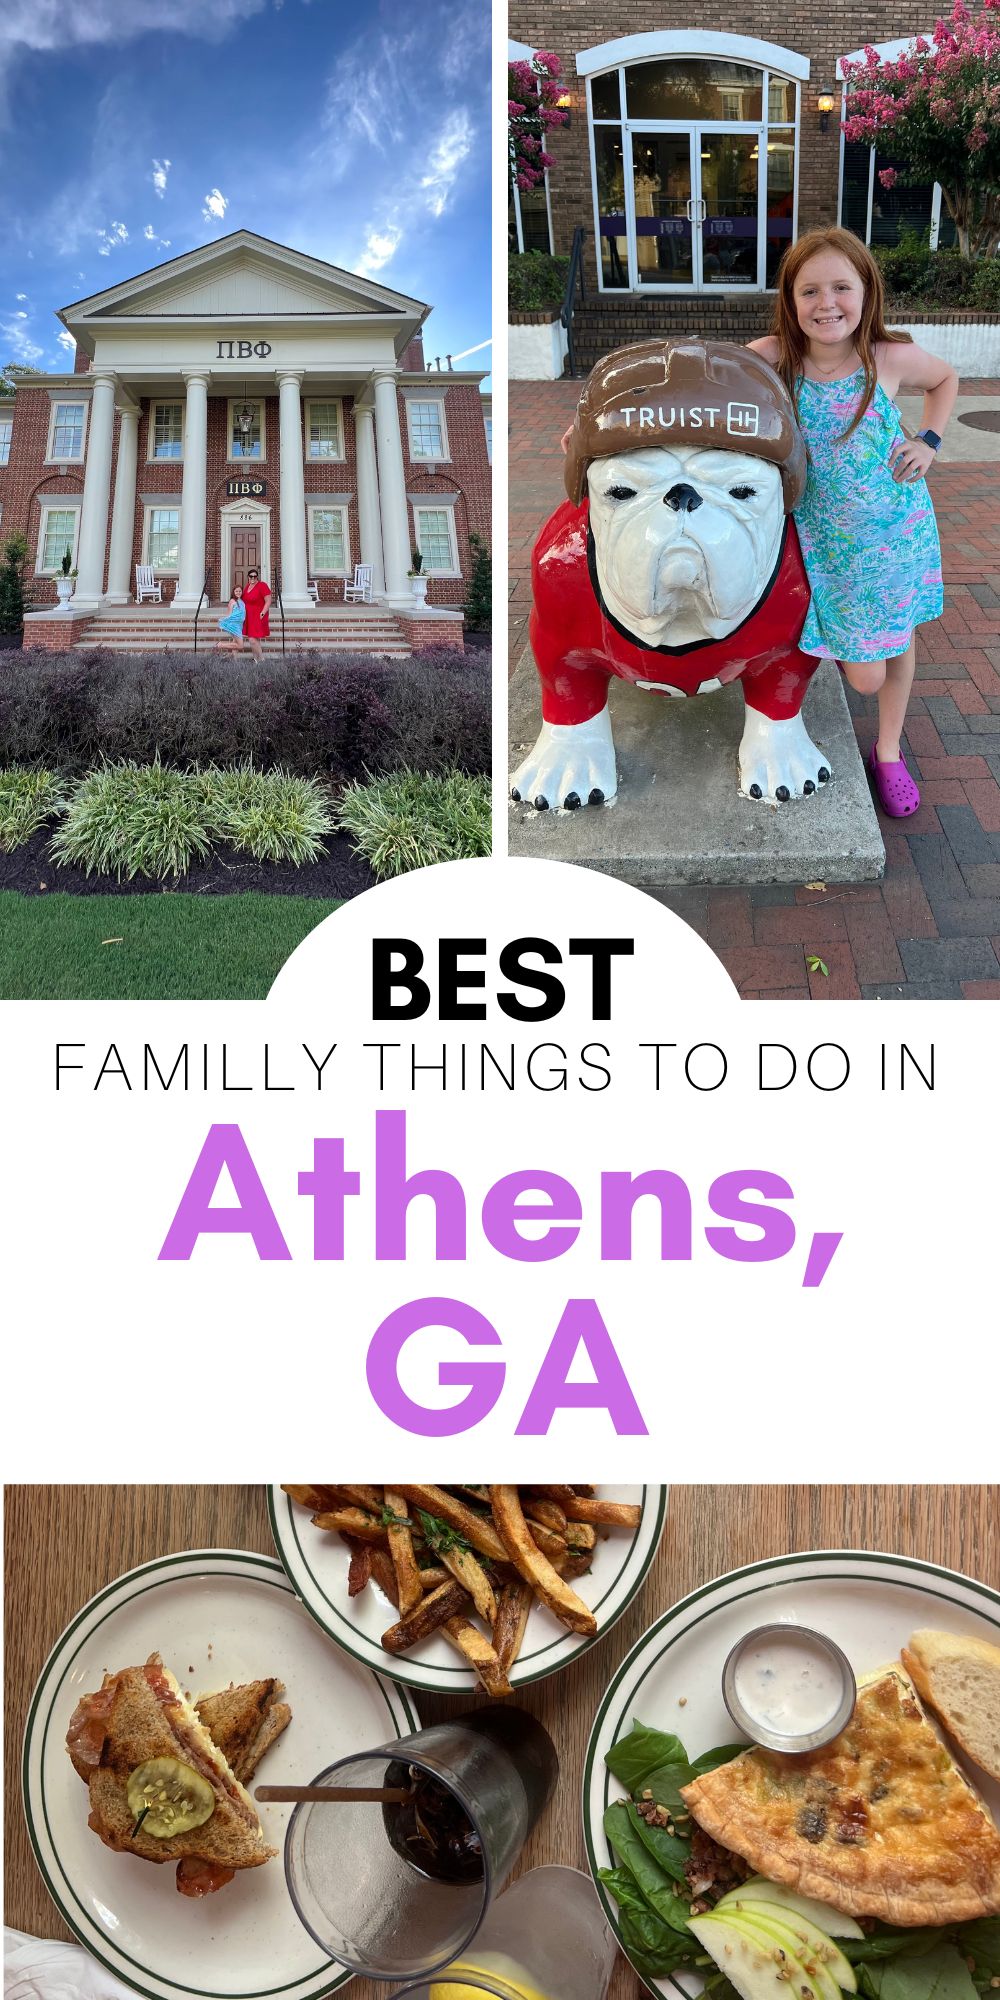 Best Family Things to do in Athens, GA